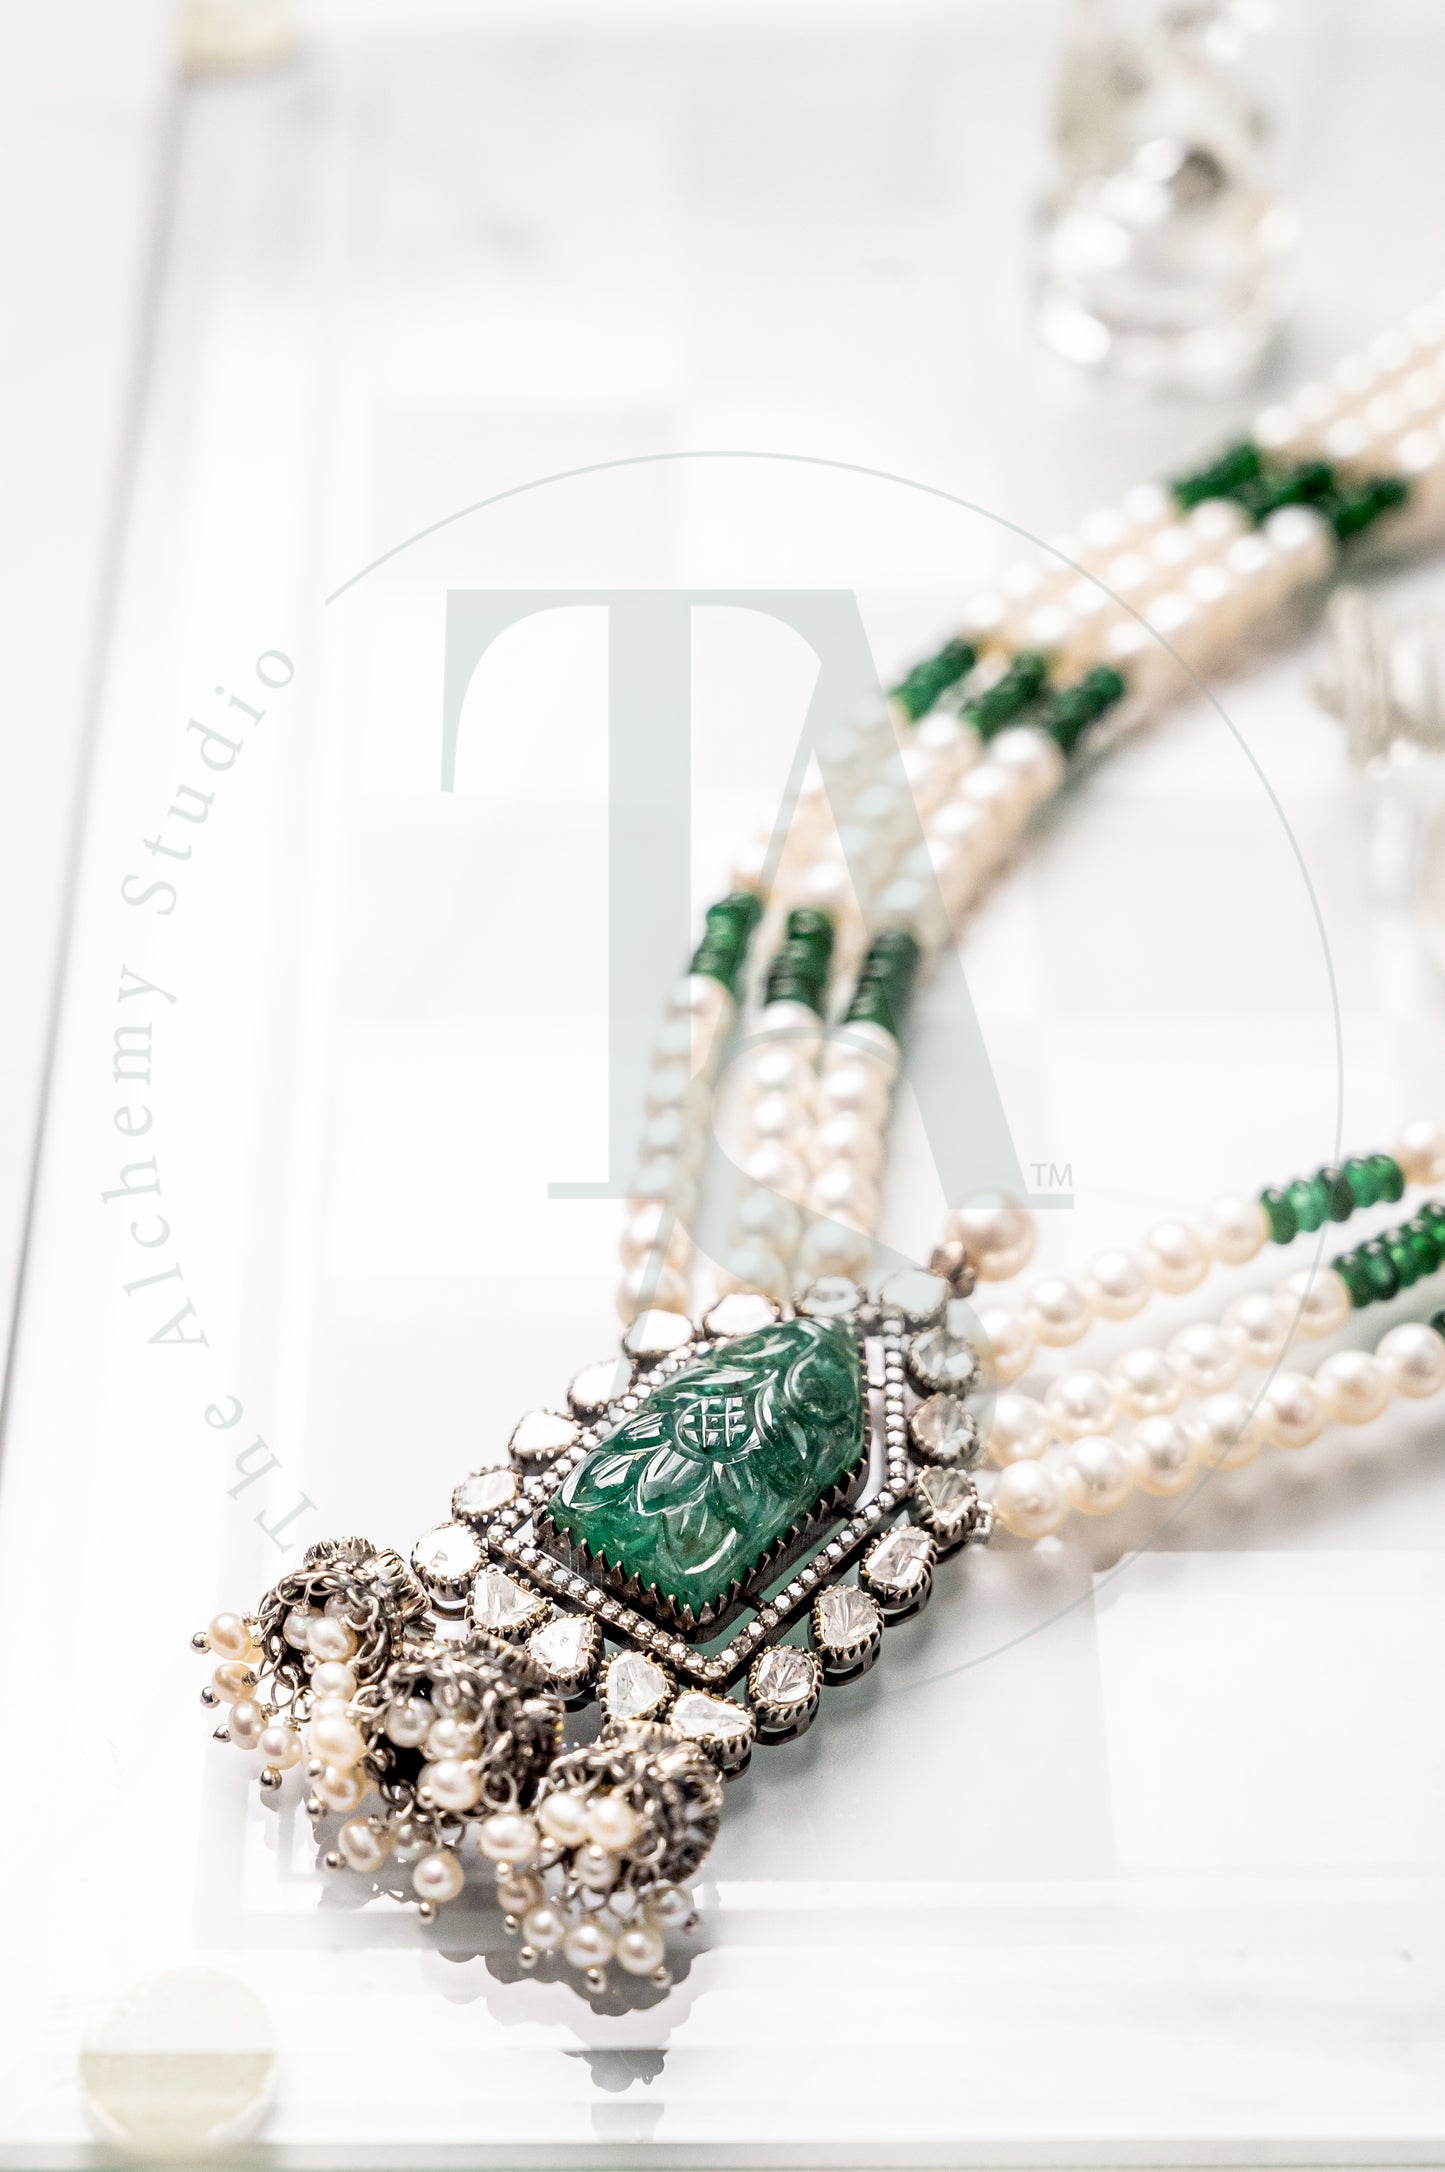 Selenite Carved Emerald and Uncut Diamond Necklace